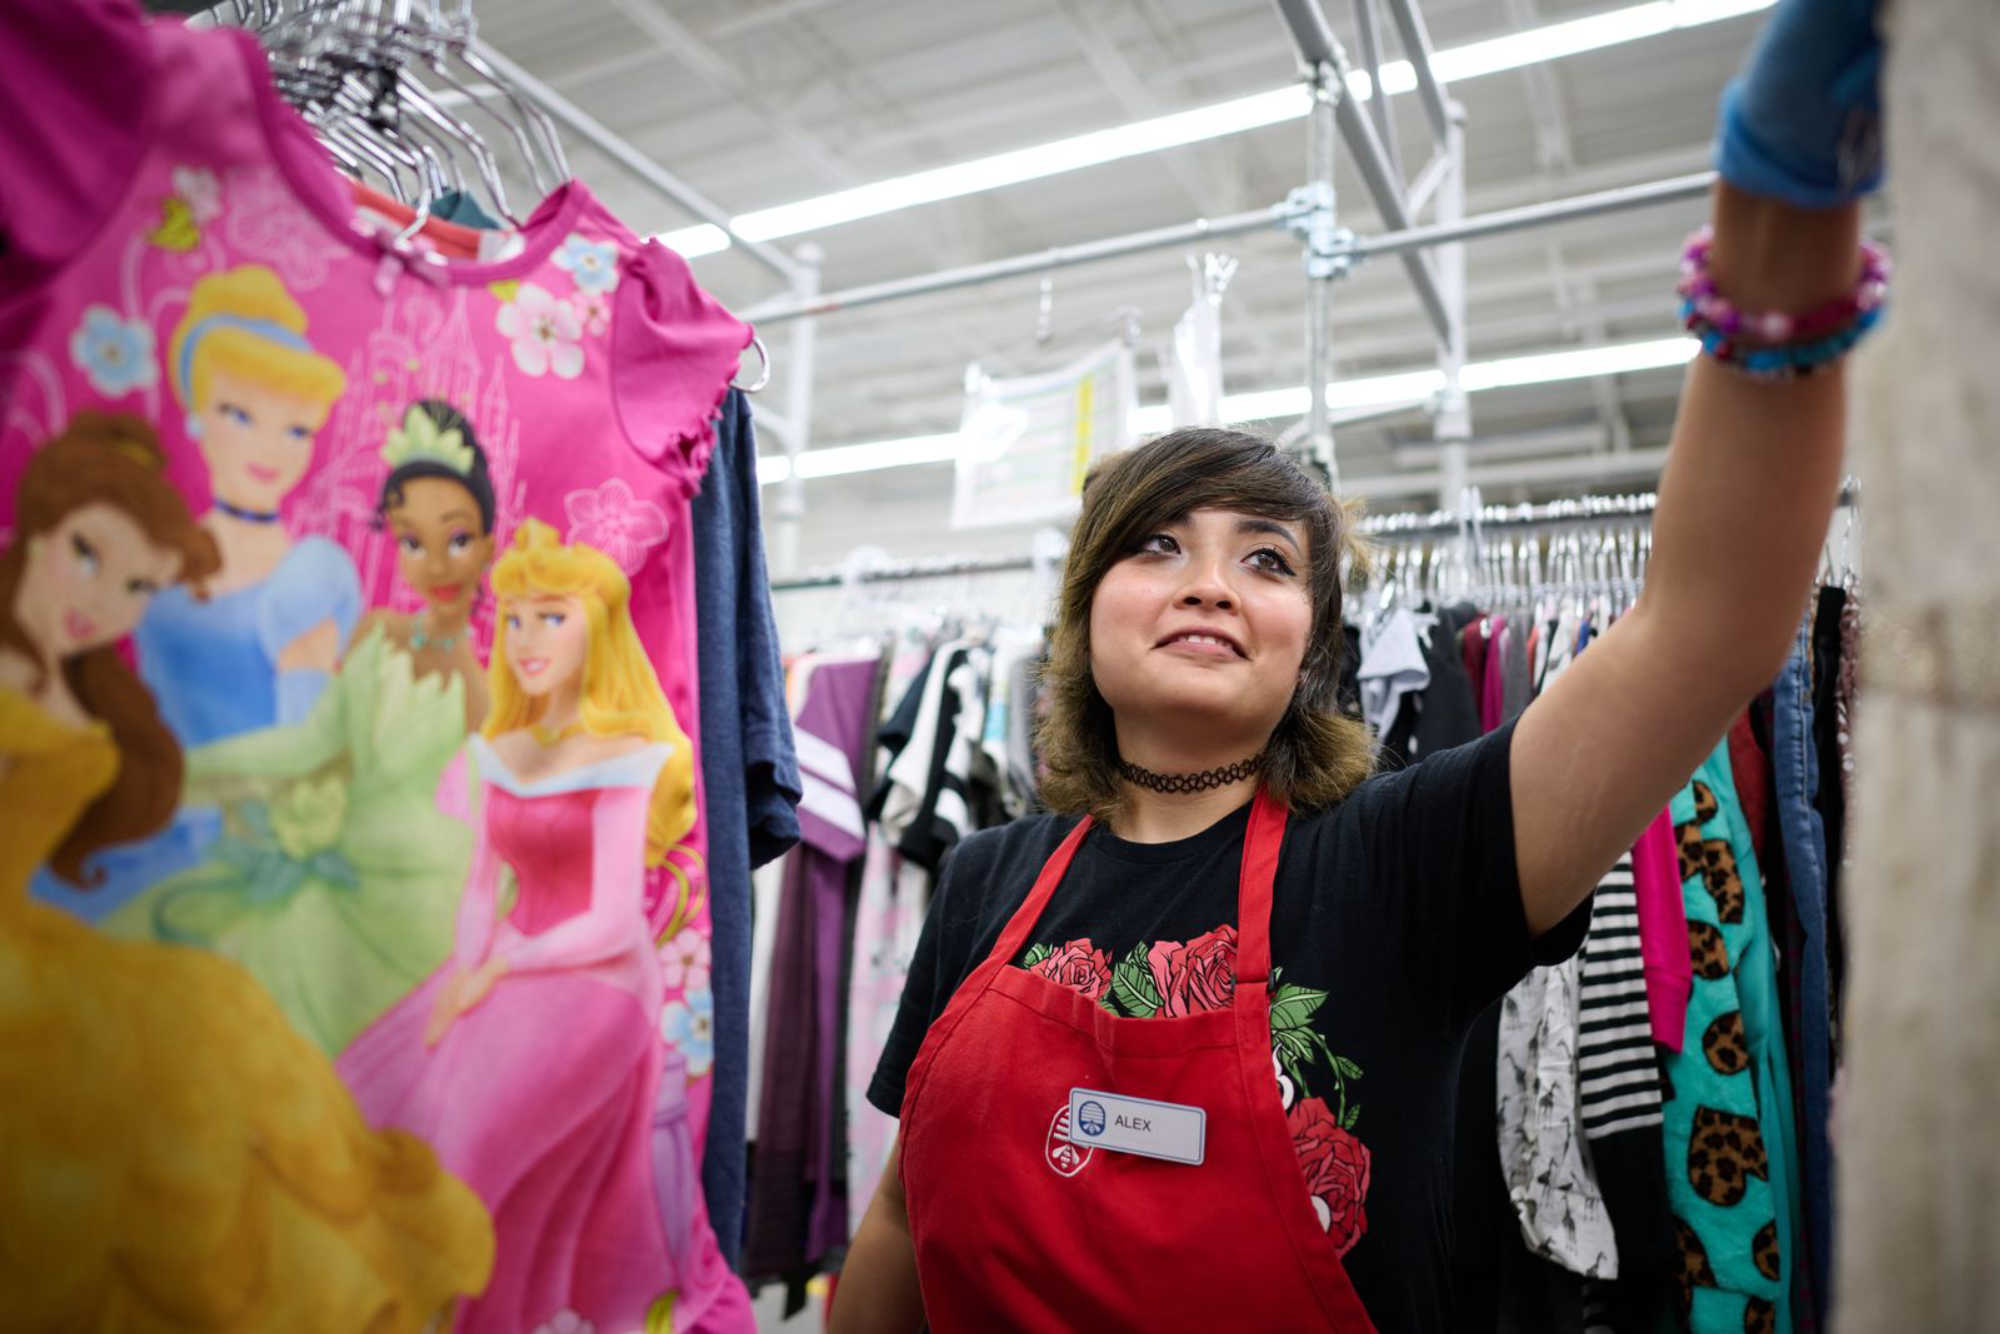 Thrift store worker puts clothes on hangers